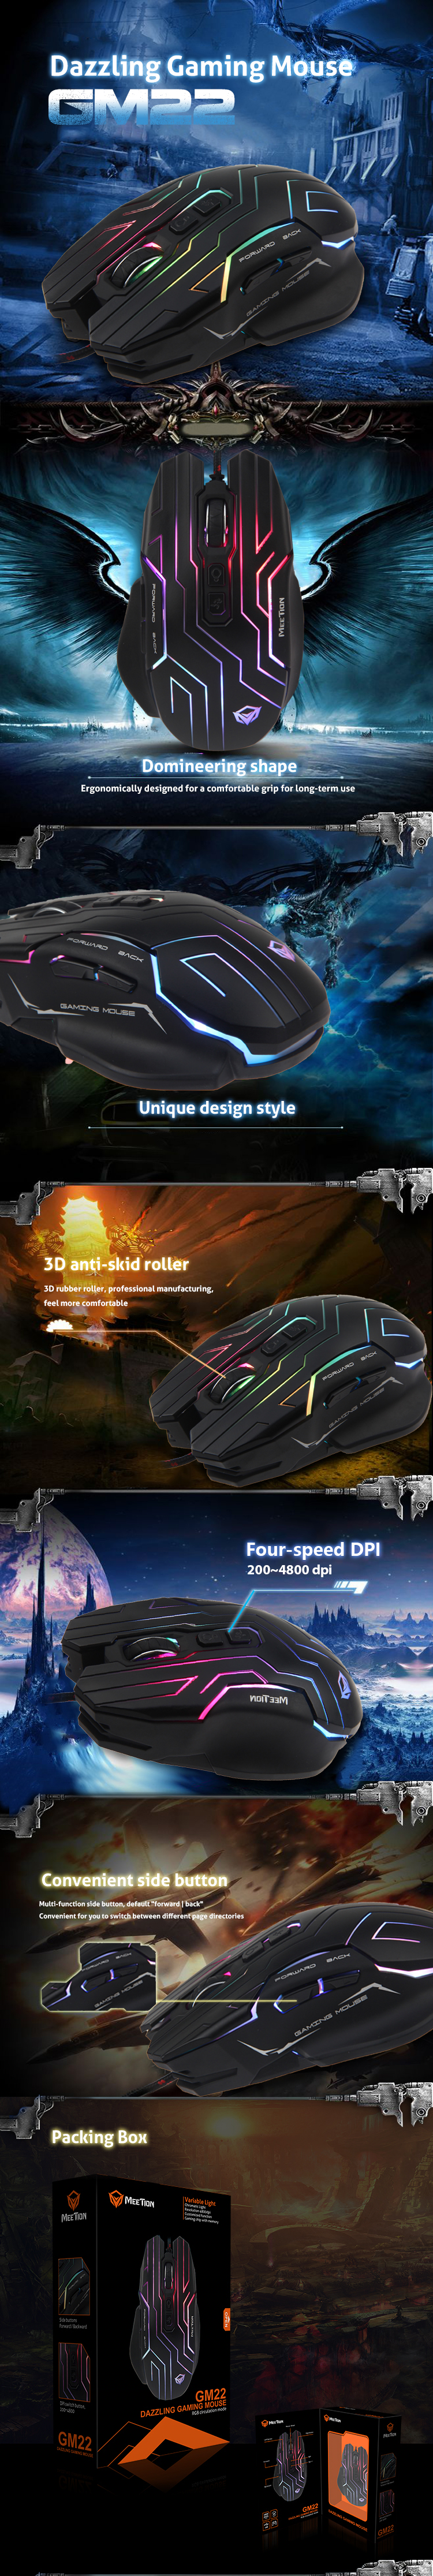 bulk purchase ambidextrous gaming mouse supplier-1